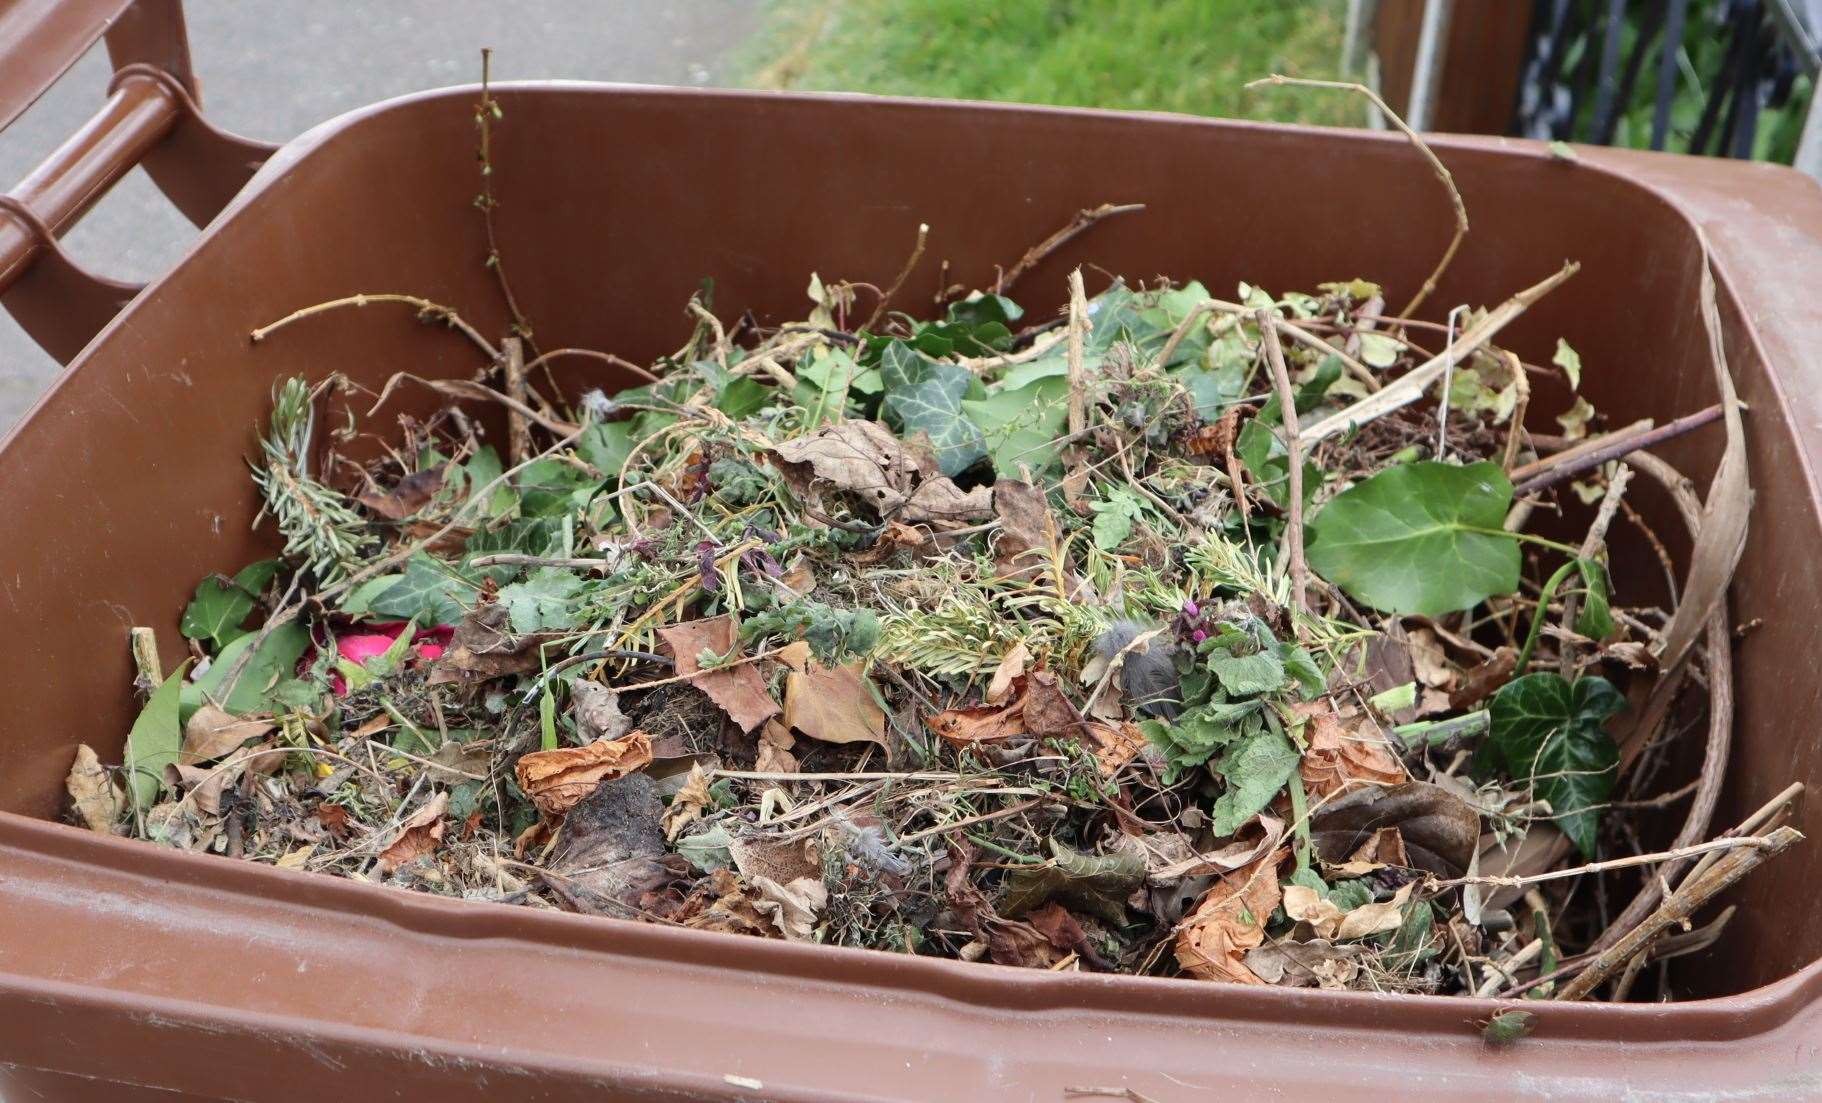 Brown bin collections for garden waste have been suspended in Maidstone this week